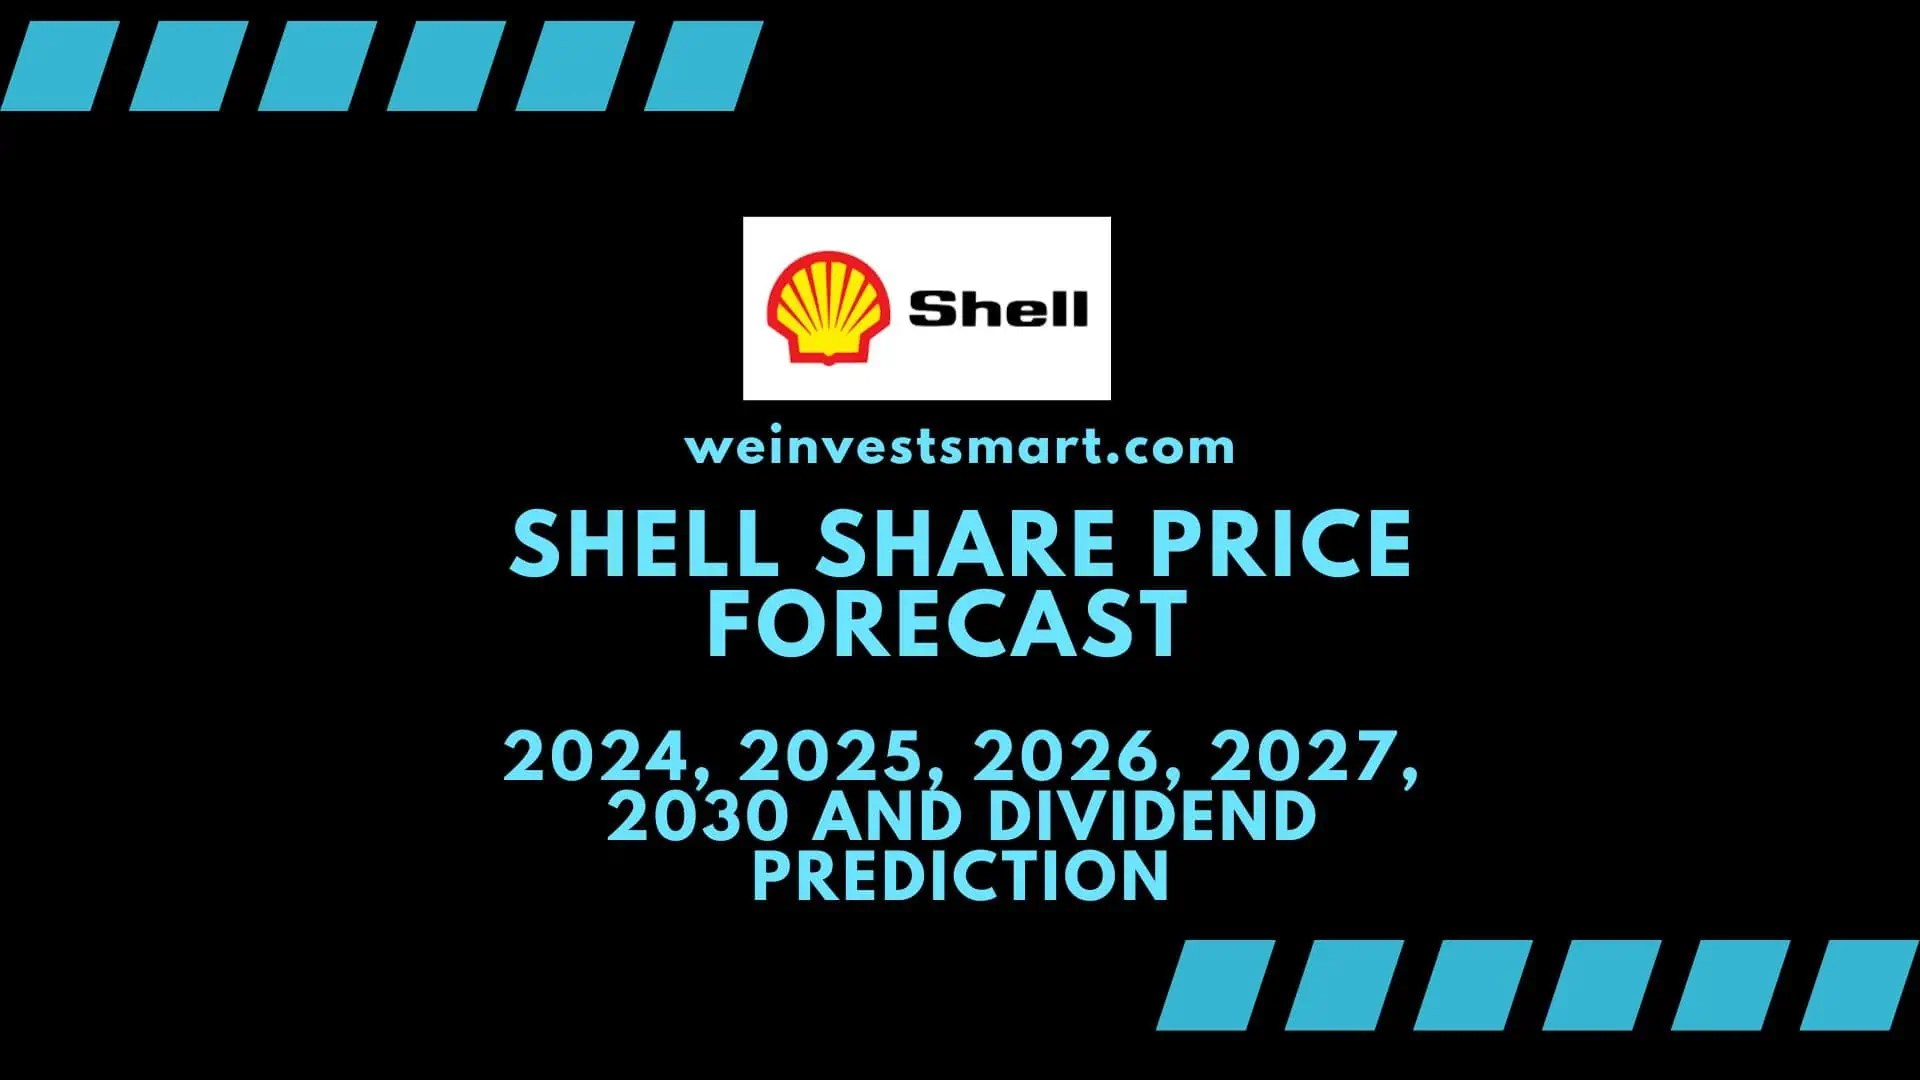 Shell Share Price Forecast 2024, 2025, 2026, 2027, 2030 and Dividend Prediction